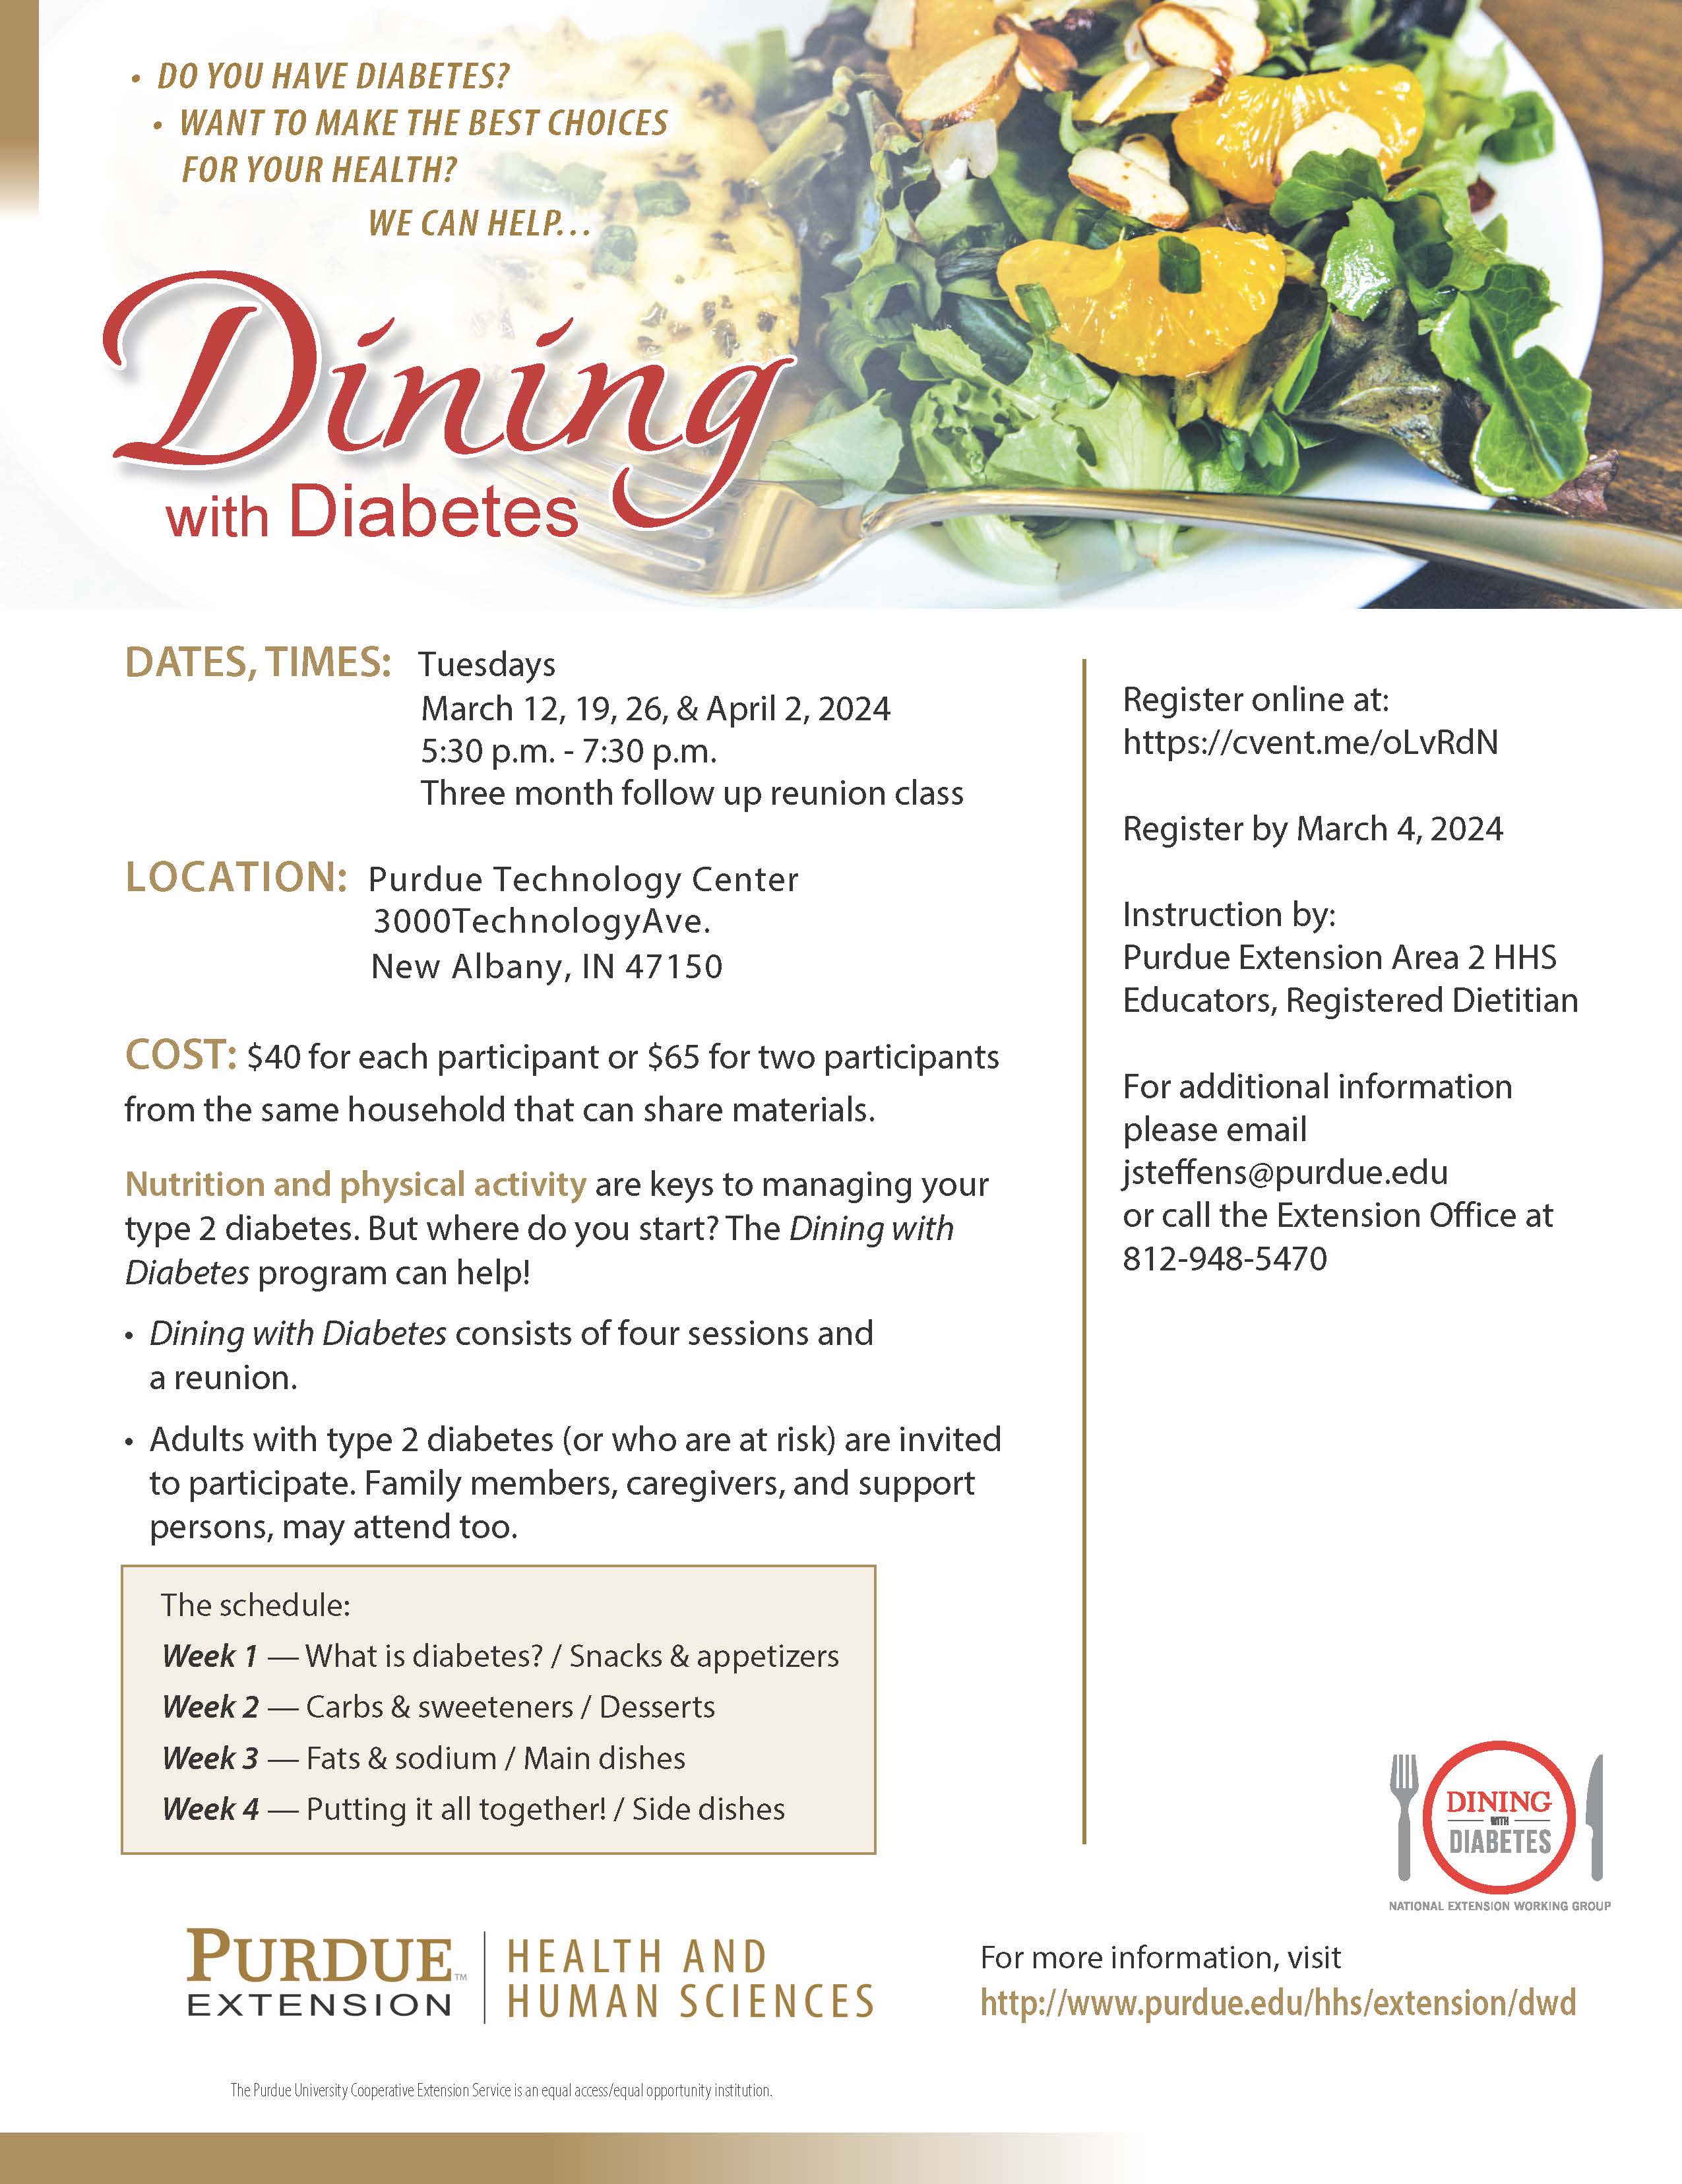 Dining with Diabetes 2024